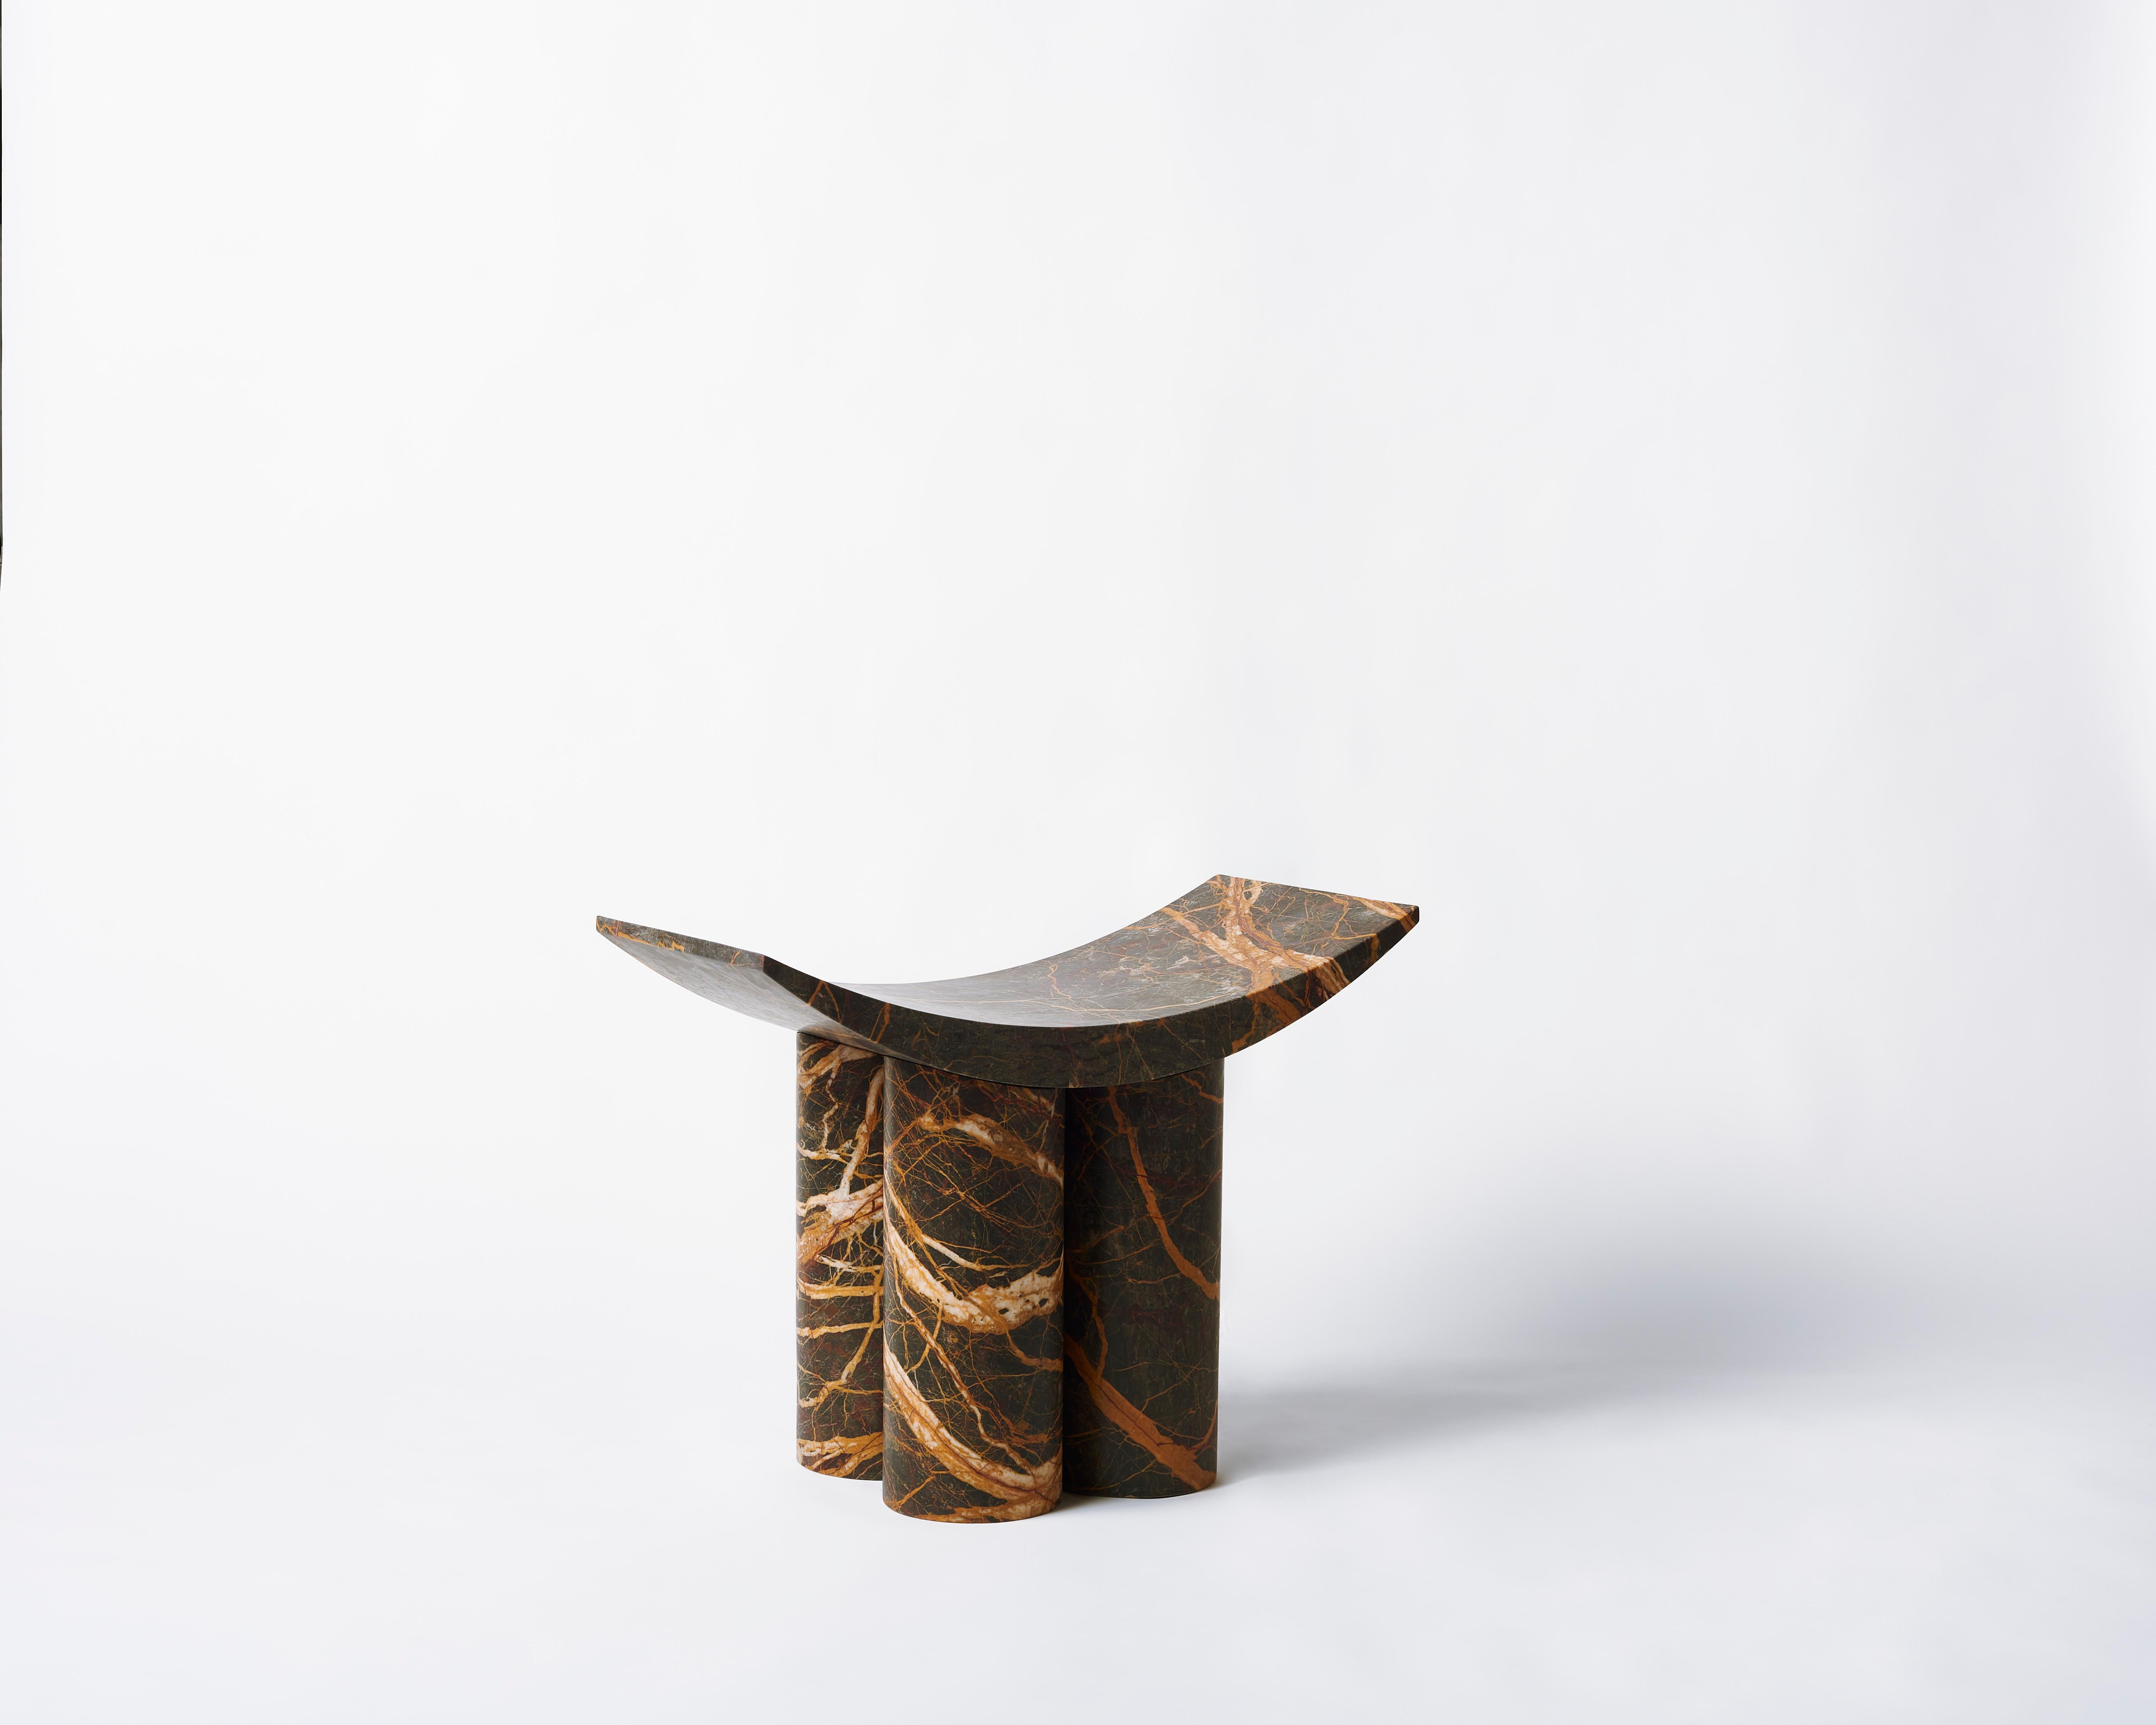 Port Laurent Marble Gamma Stool by Pietro Franceschini
Materials: Port Laurent Marble 
Dimensions: W 70cm, L 35cm, H 45cm
Available in other marbles.


Pietro Franceschini
Architect // Designer
Pietro Franceschini is an architect and designer based